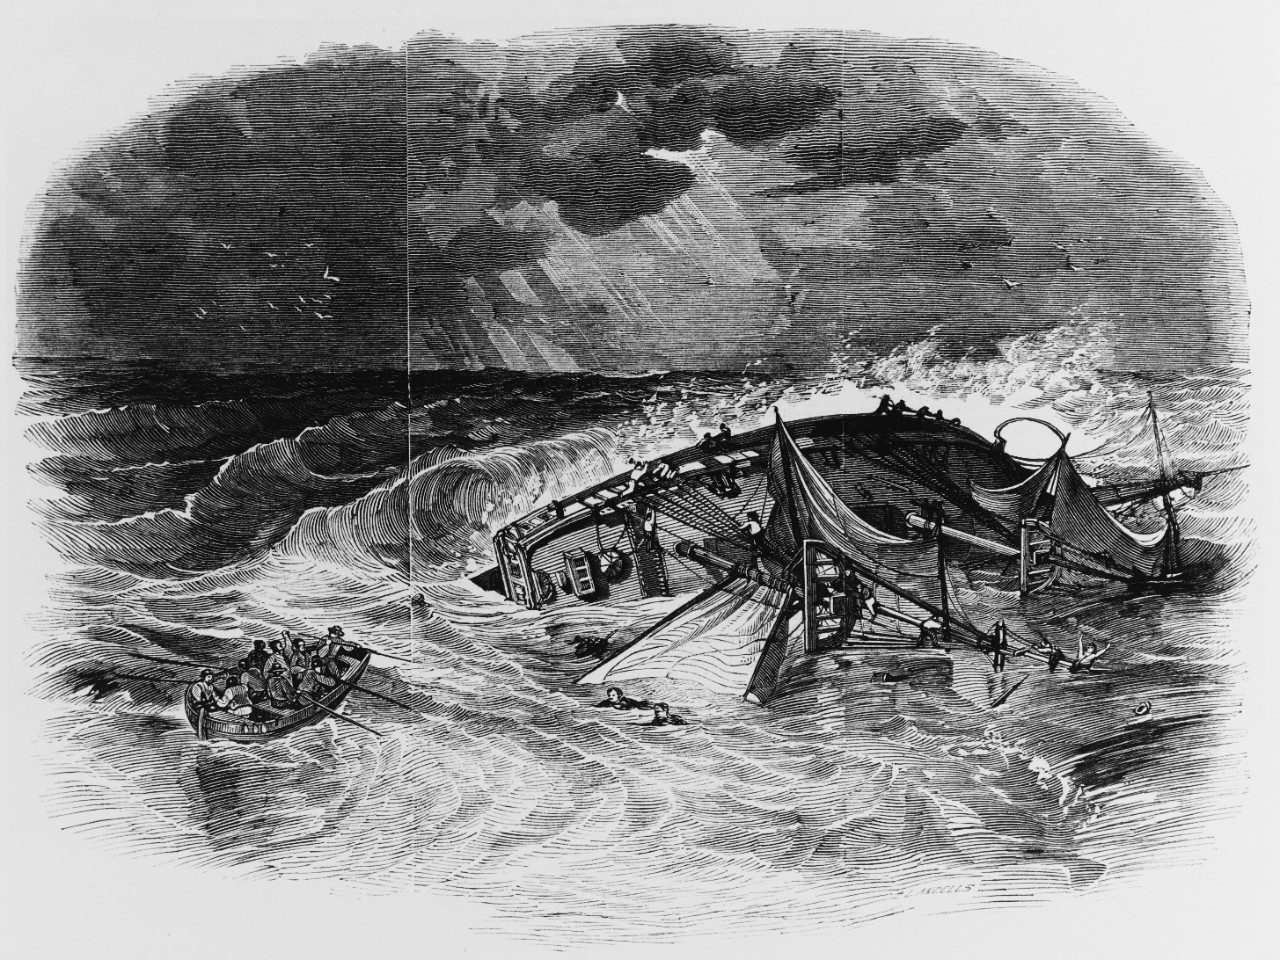 Photo #: NH 82556  Loss of USS Somers, 8 December 1846